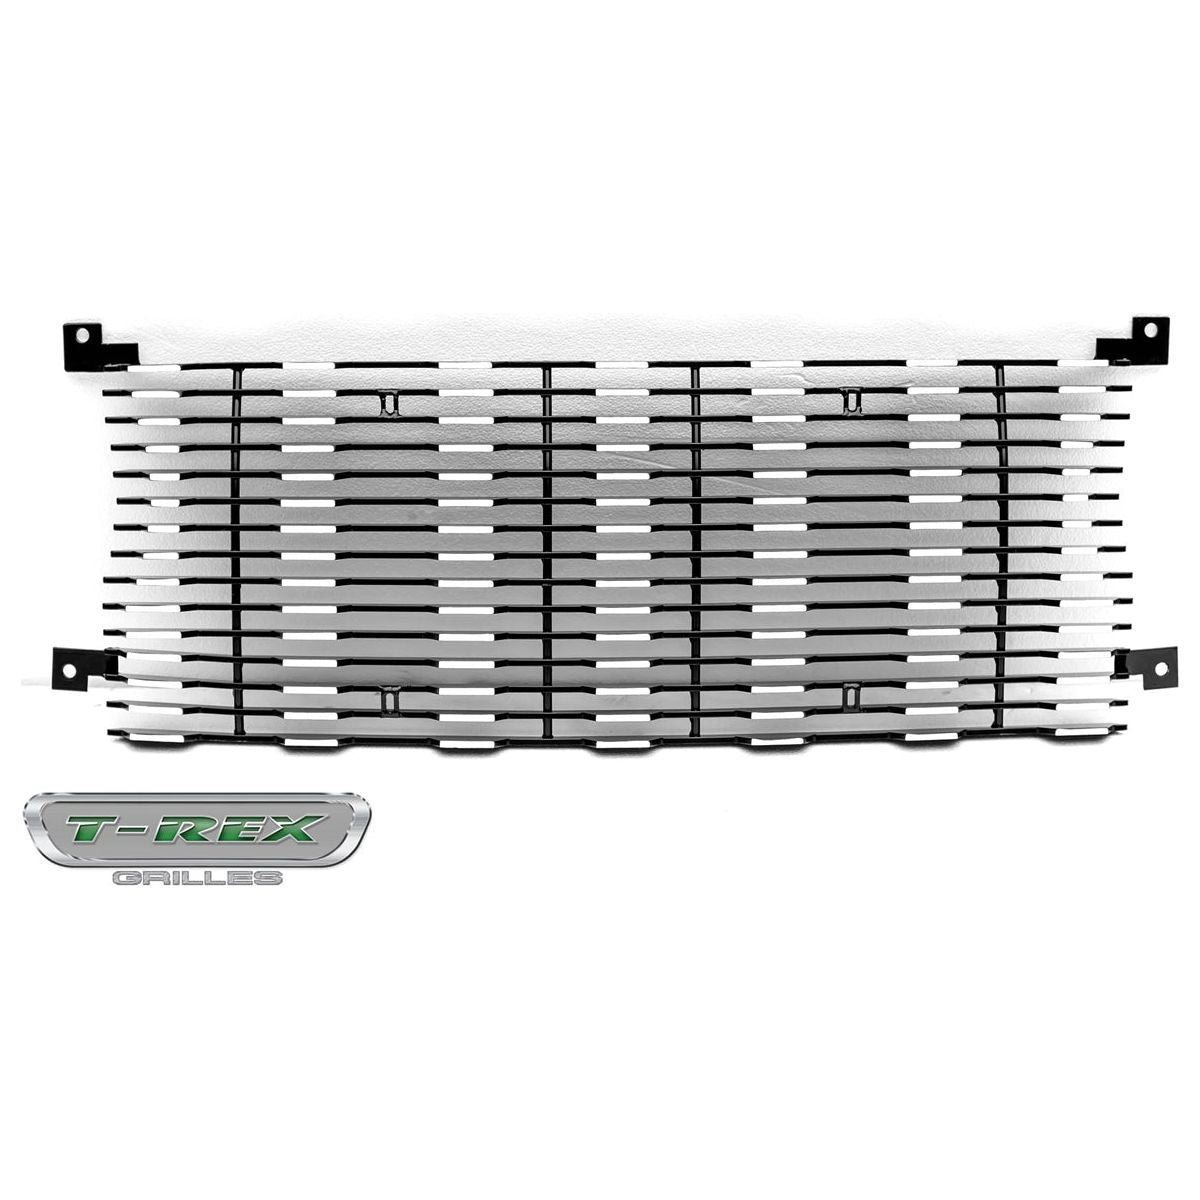 T-Rex Billet Grille, Brushed, 1 Pc, Insert without Forward Facing